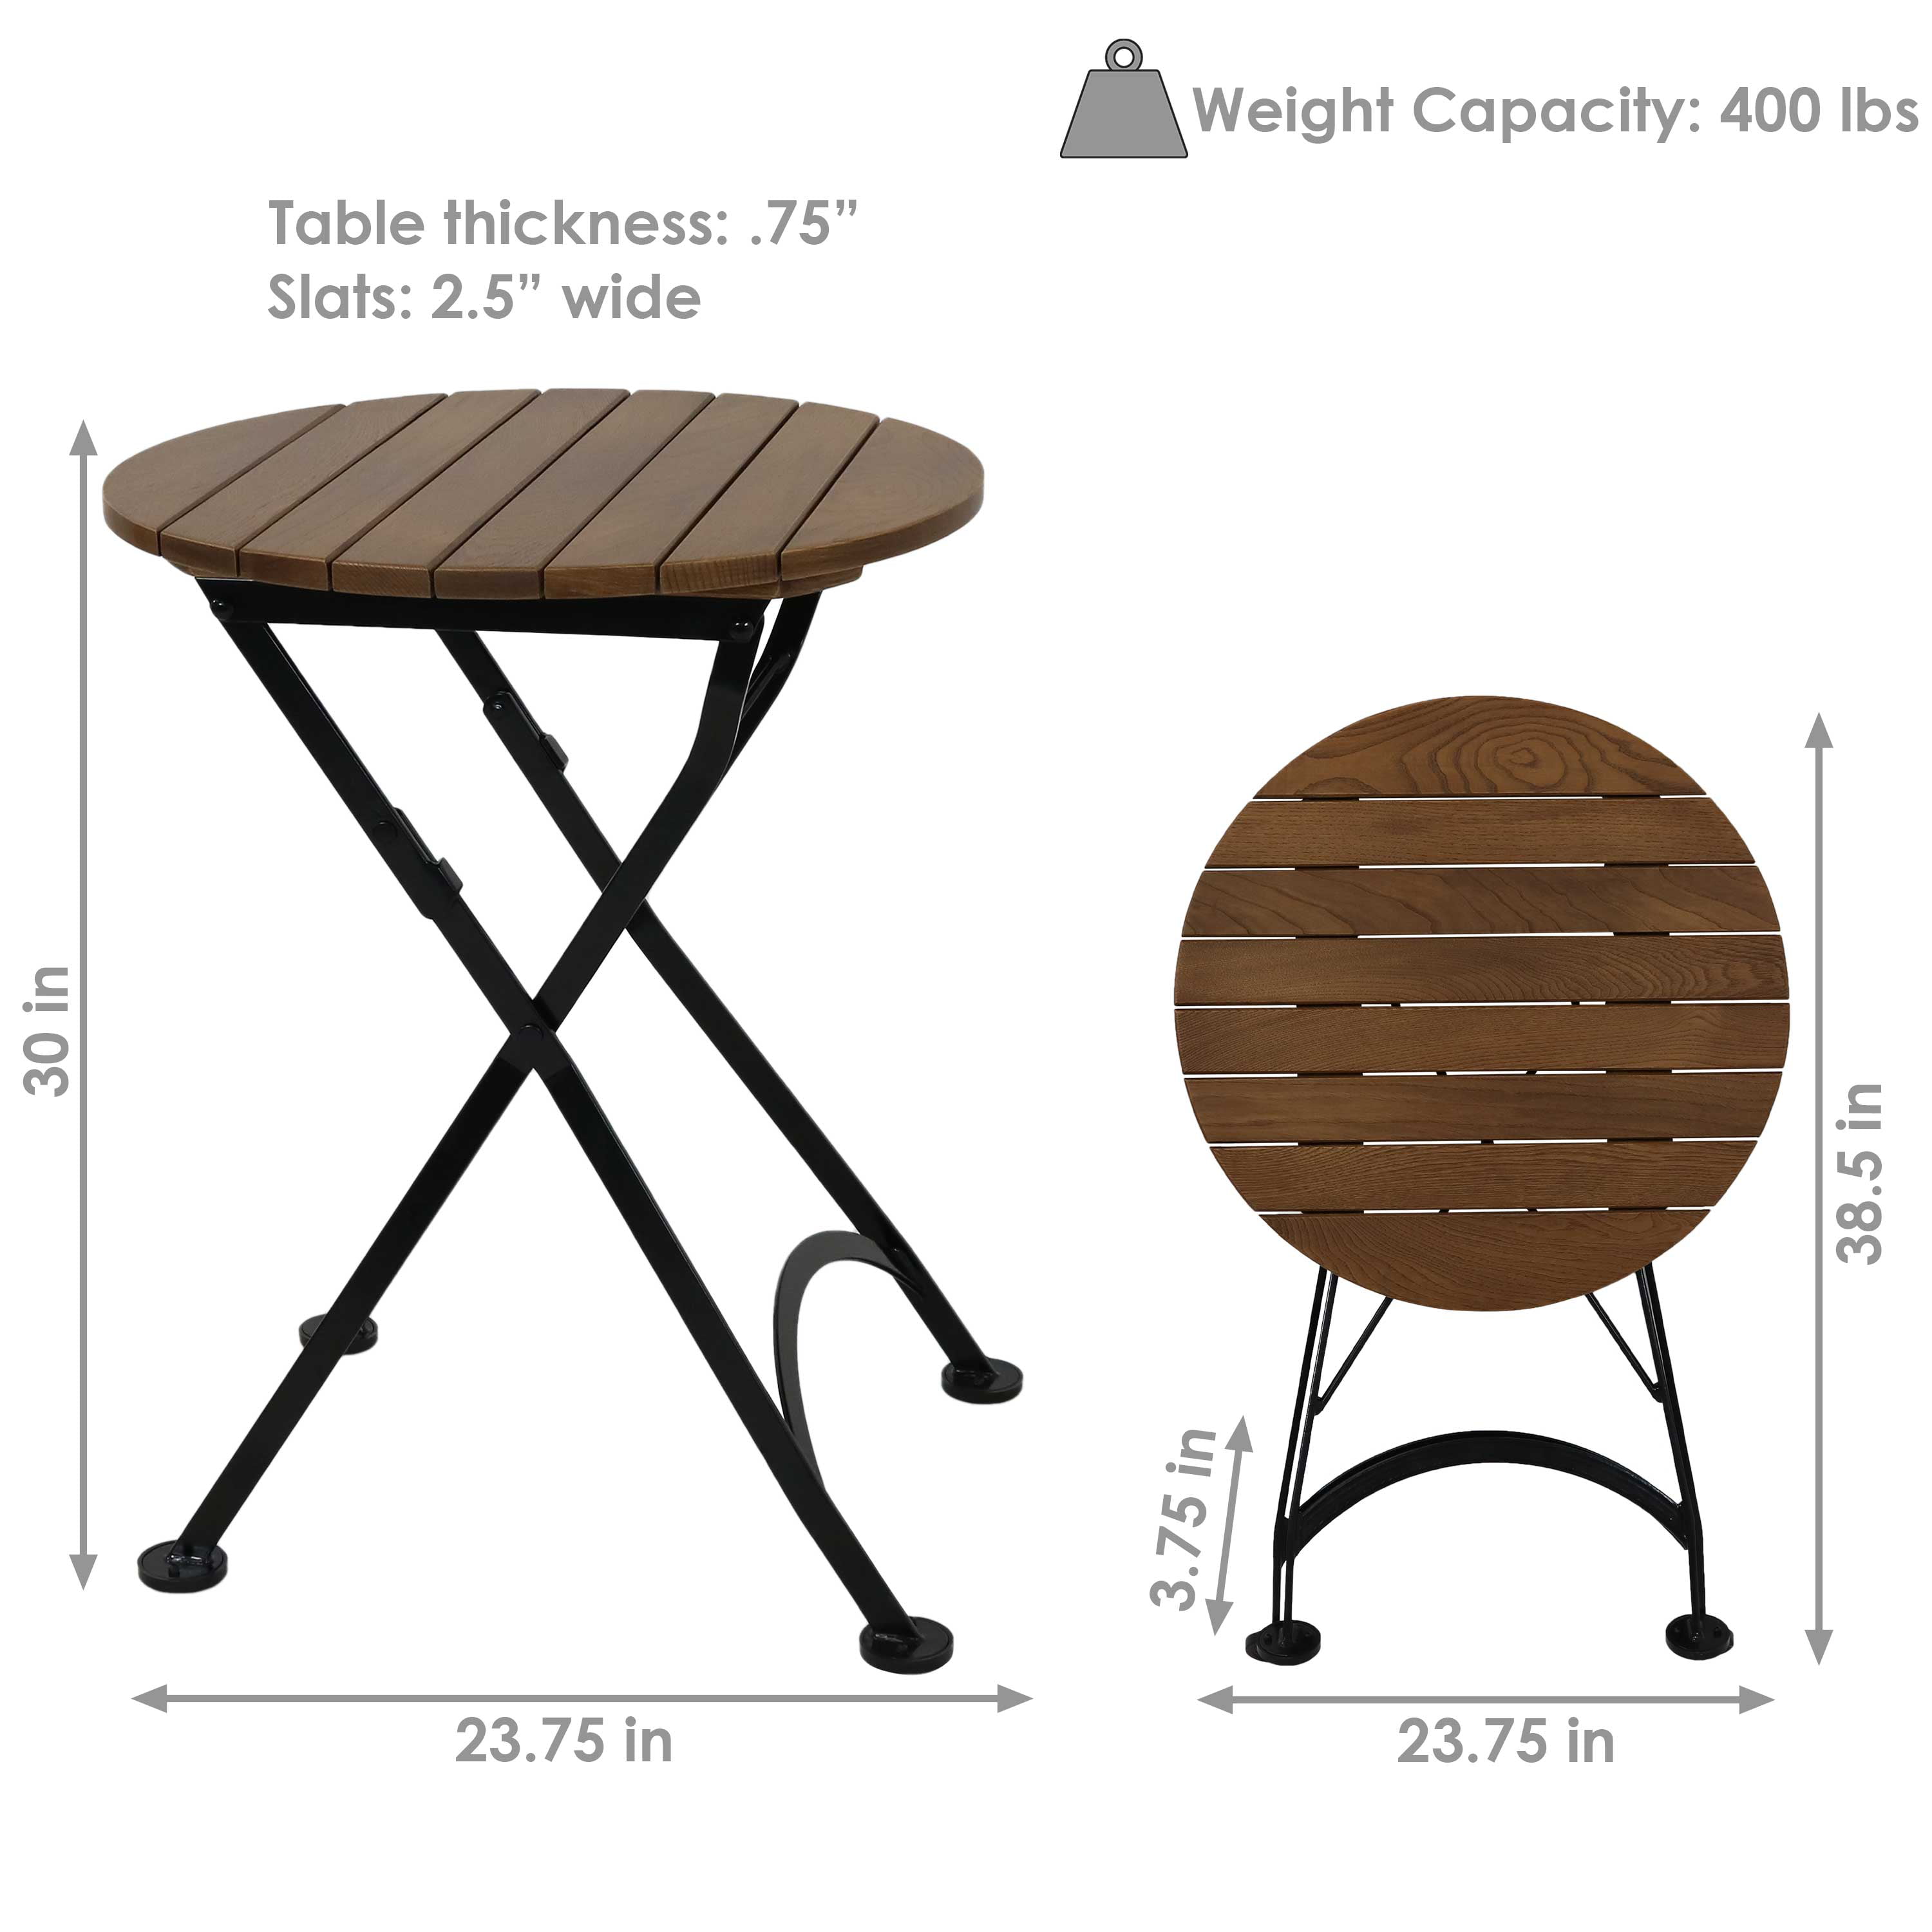 Sunnydaze European Chestnut Wood Folding Round Bistro Dining Table Foldable for Easy Storage Indoor/Outdoor Table for Patio 24-Inch Diameter Kitchen or Dining Room Brown